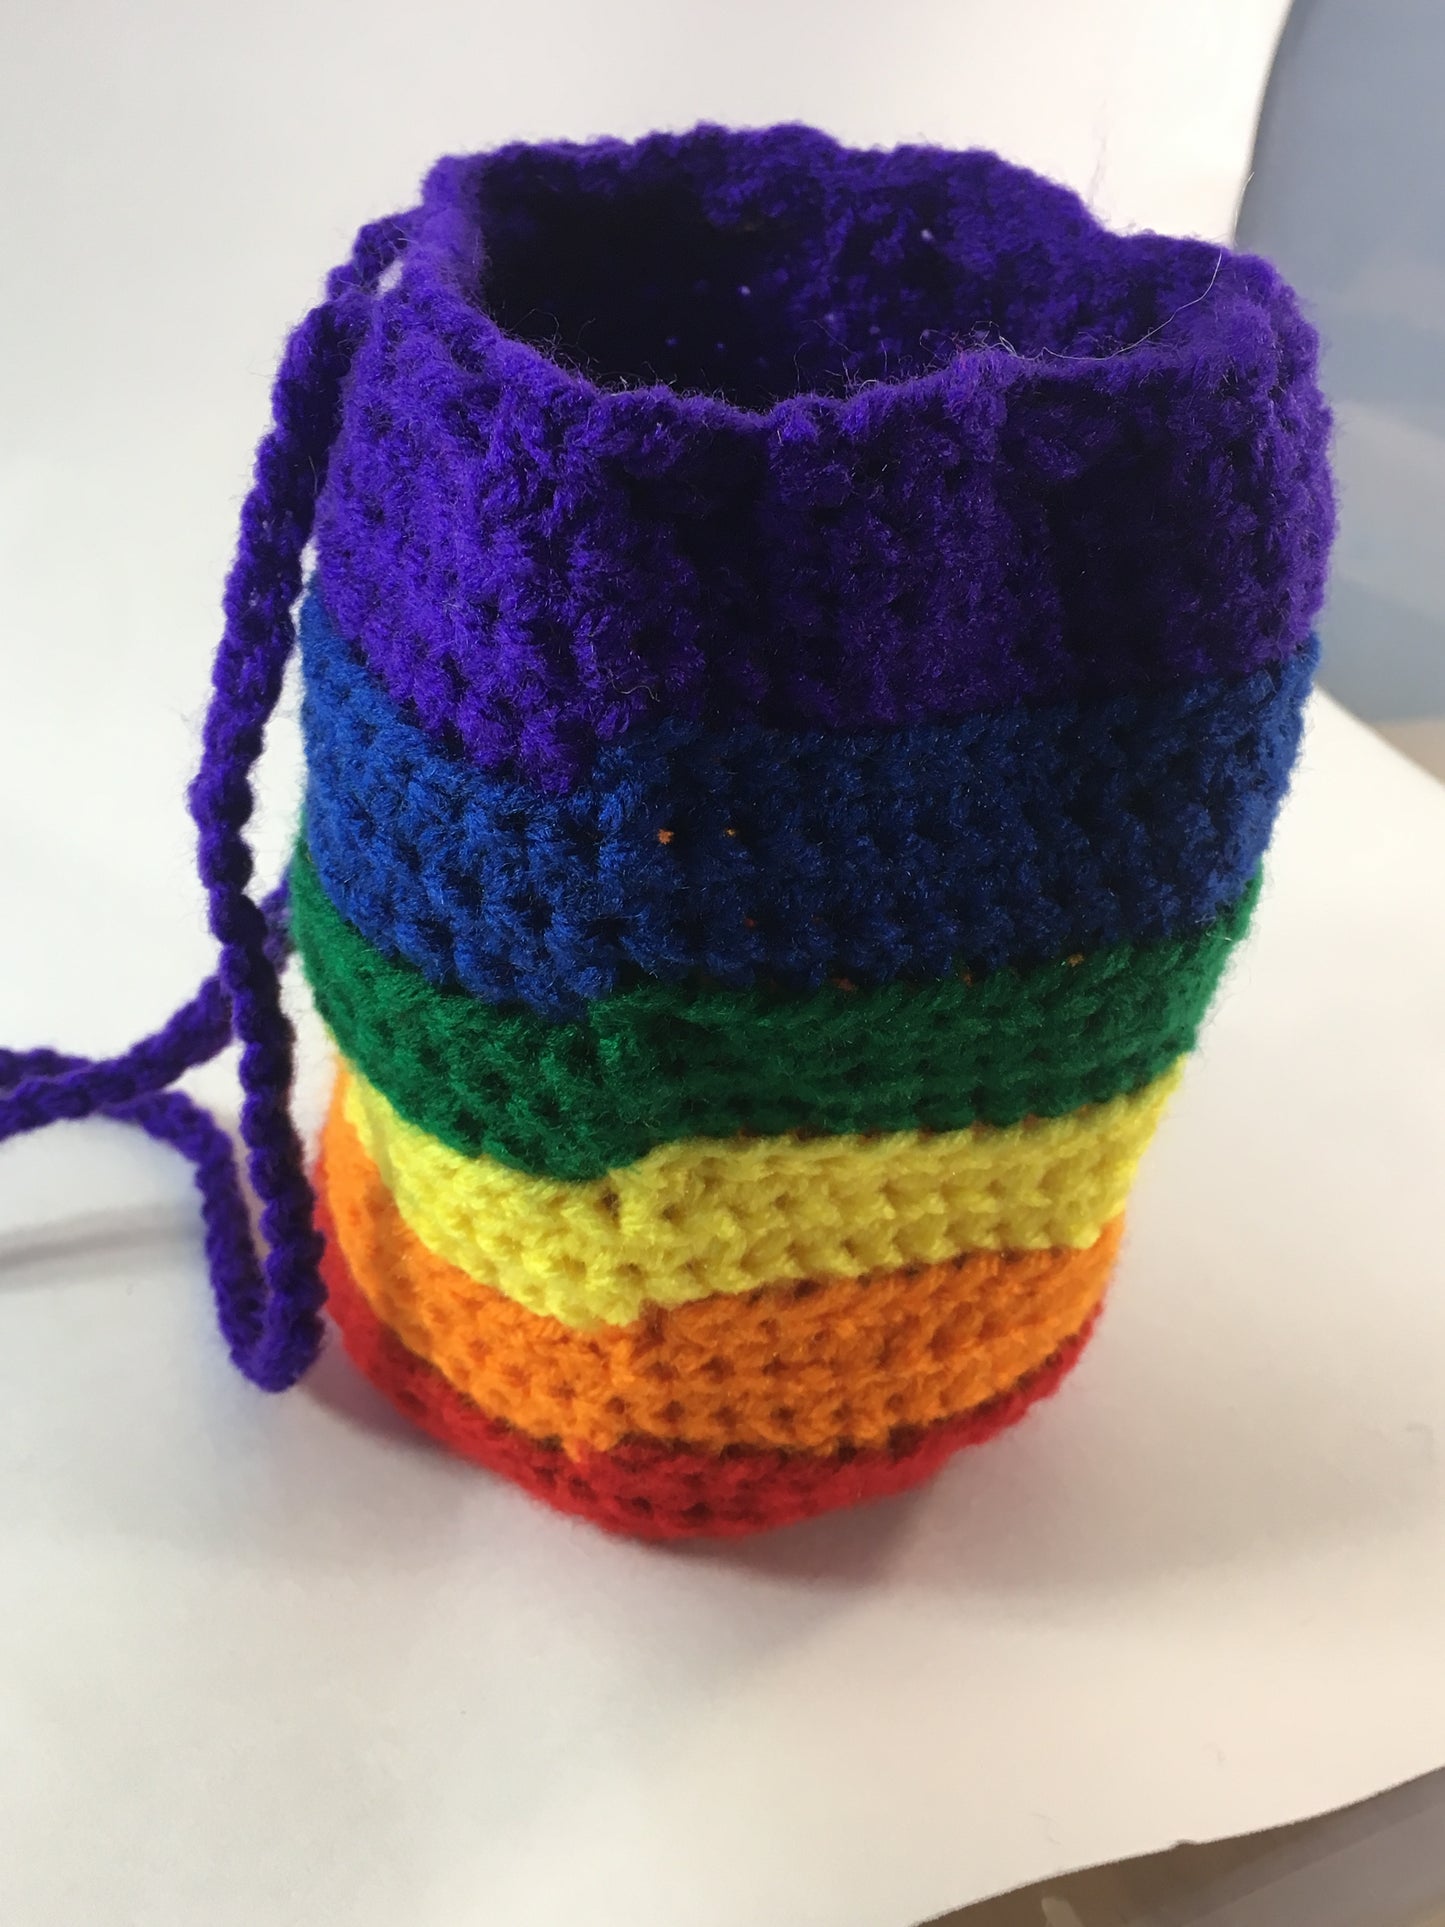 Rainbow Gay Pride D&D Pathfinder Tabletop Game Dice Drawstring Crochet Dungeons and Dragons Bag Pouch